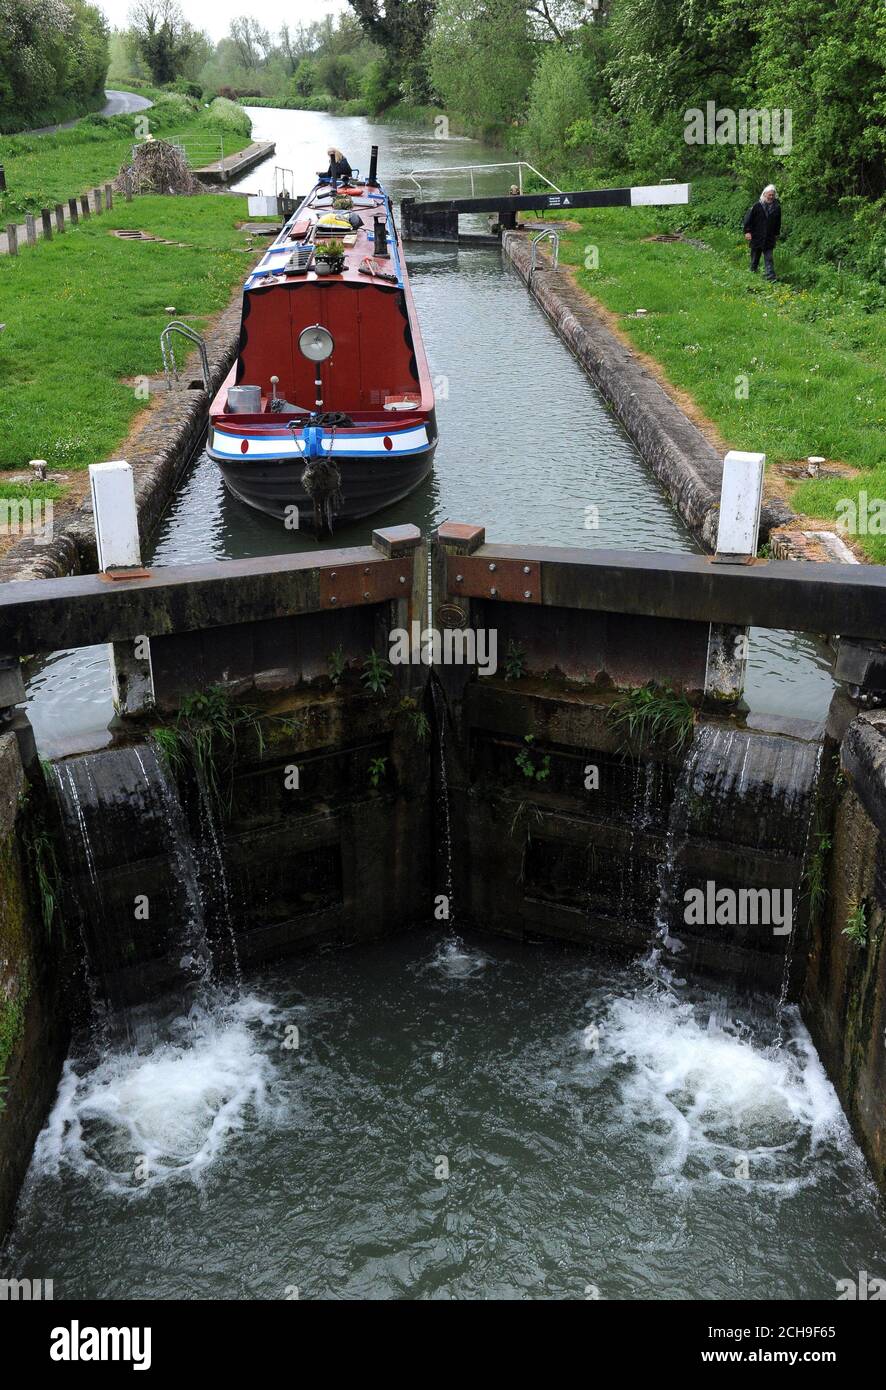 A canal boat is navigated through a lock on the Kennet and Avon canal near to Froxfield in Wiltshire. Stock Photo